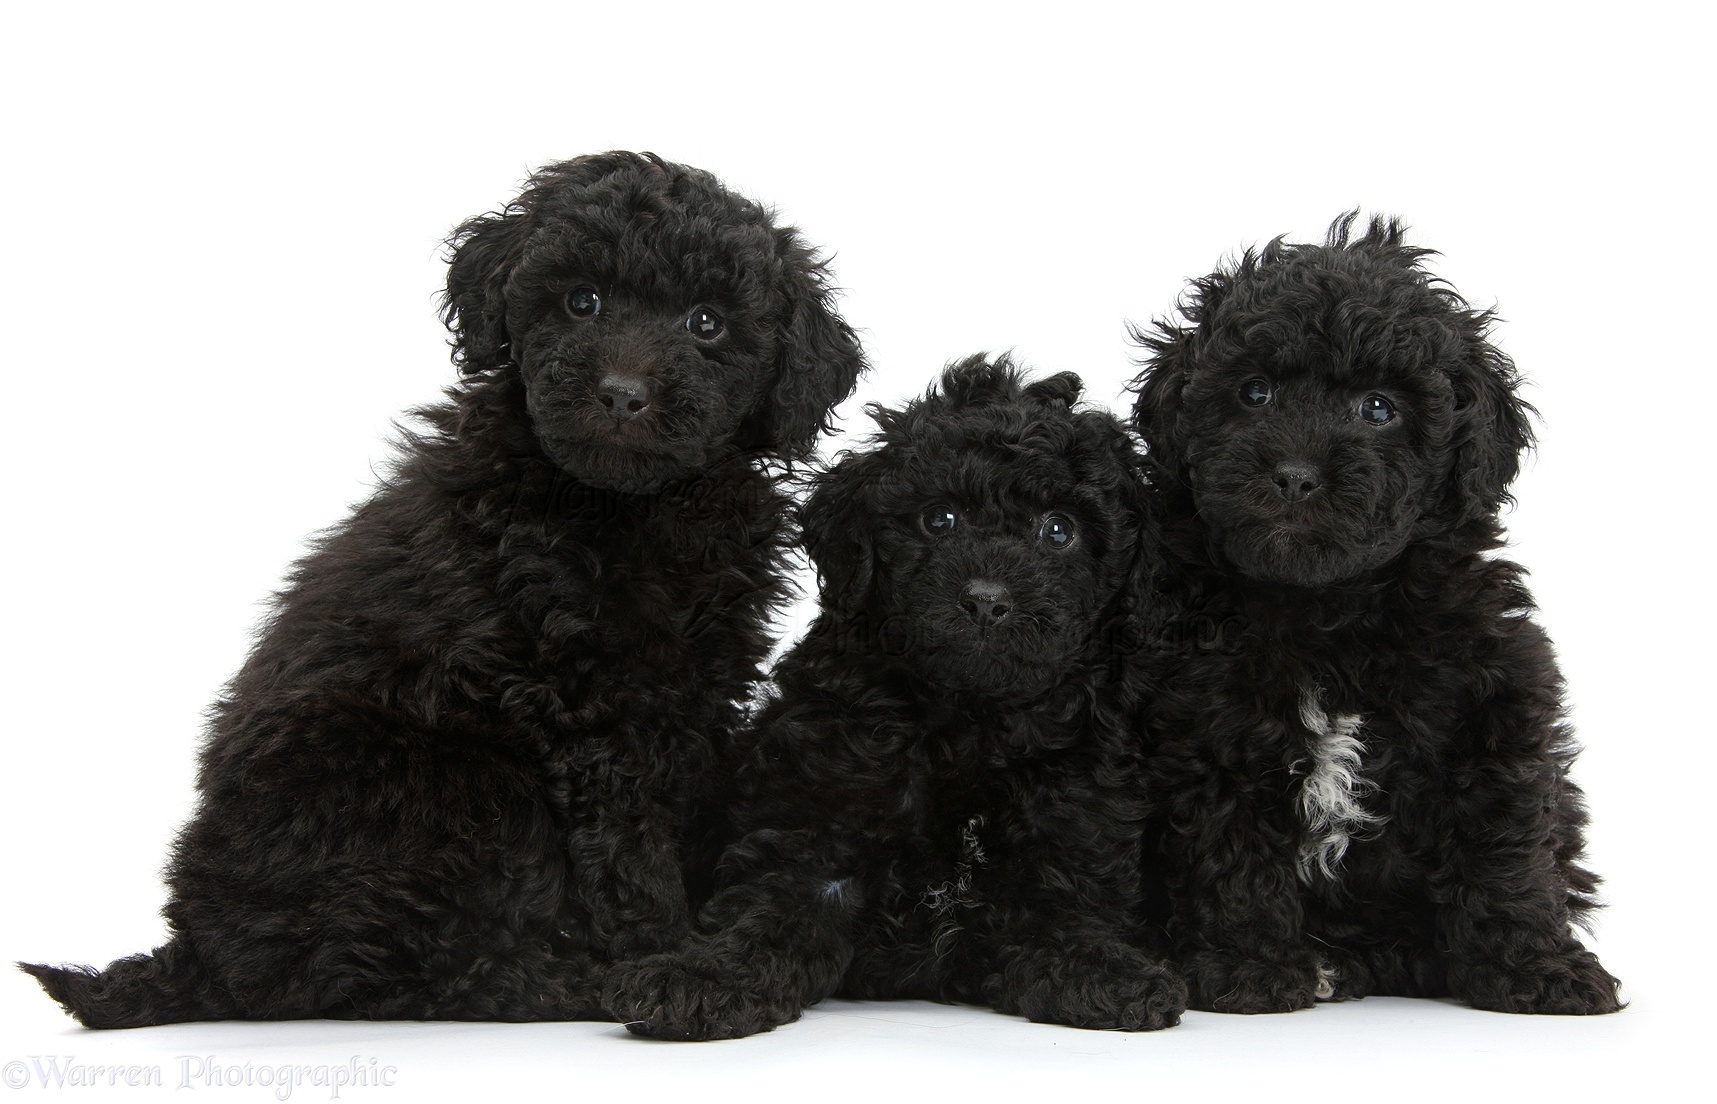 Are  Labradoodles black good pet dogs?